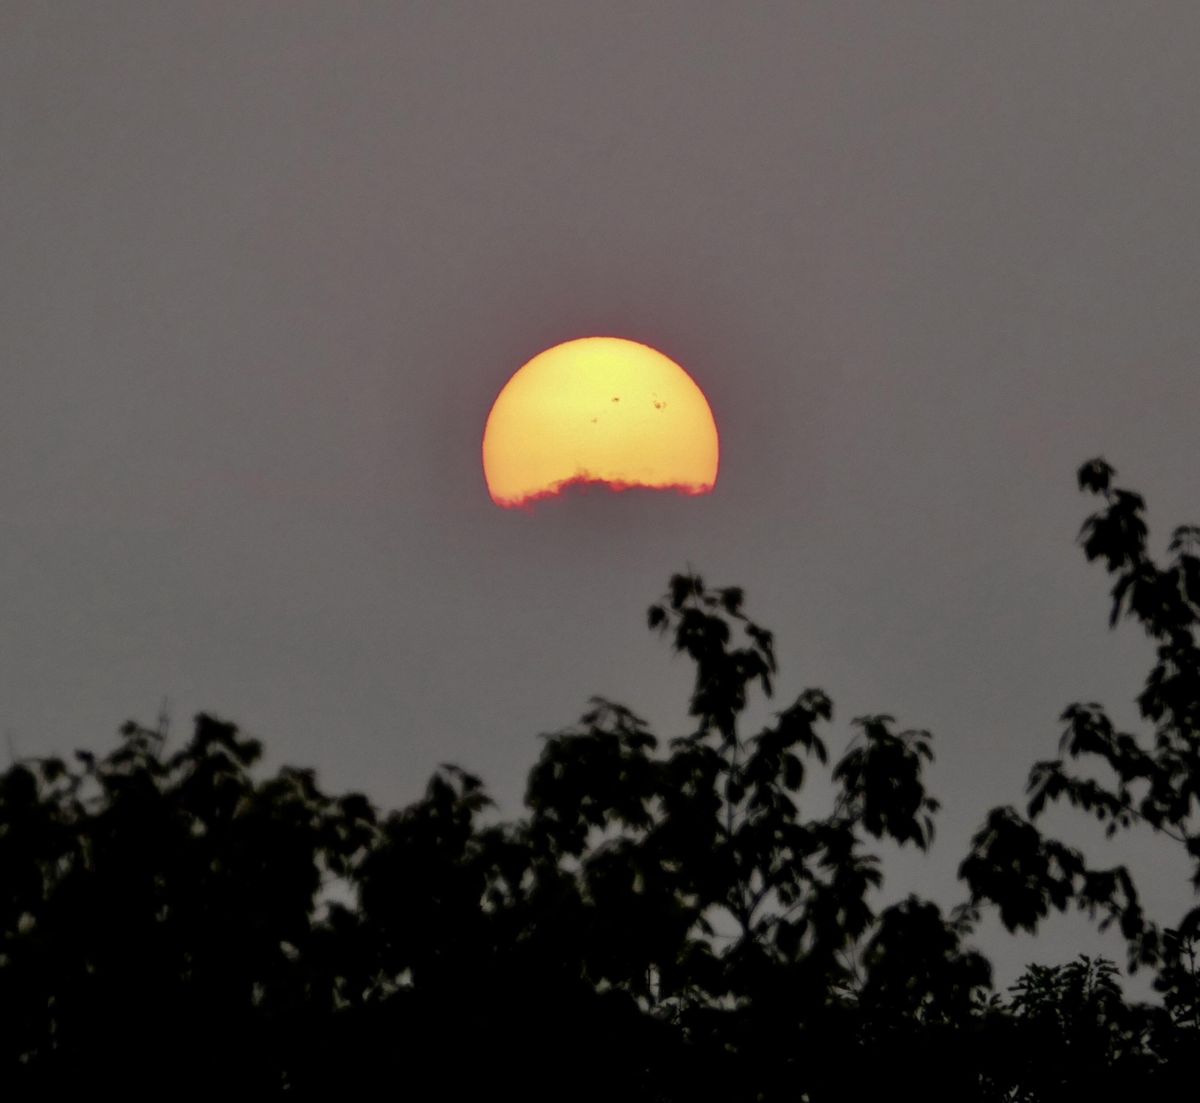 A red sun rises over distant clouds, Wednesday, Sept. 6, 2017 as seen from Spokane, Wash. (Jesse Tinsley / The Spokesman-Review)